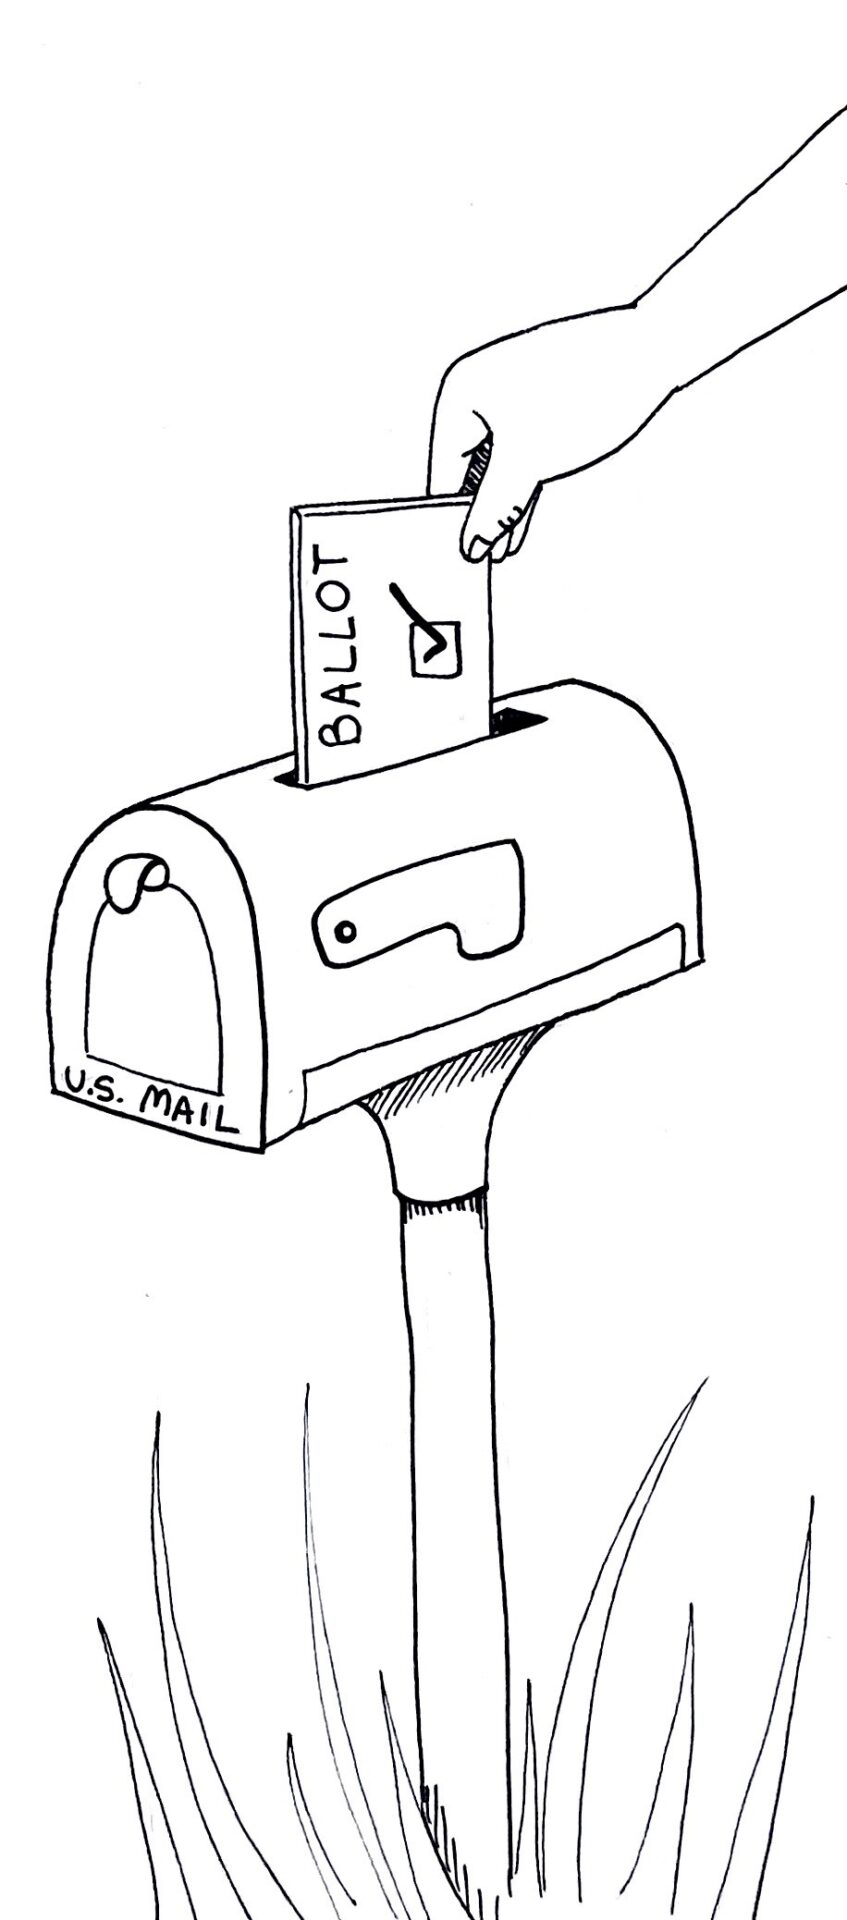 Illustration of arm putting a ballot in a mailbox